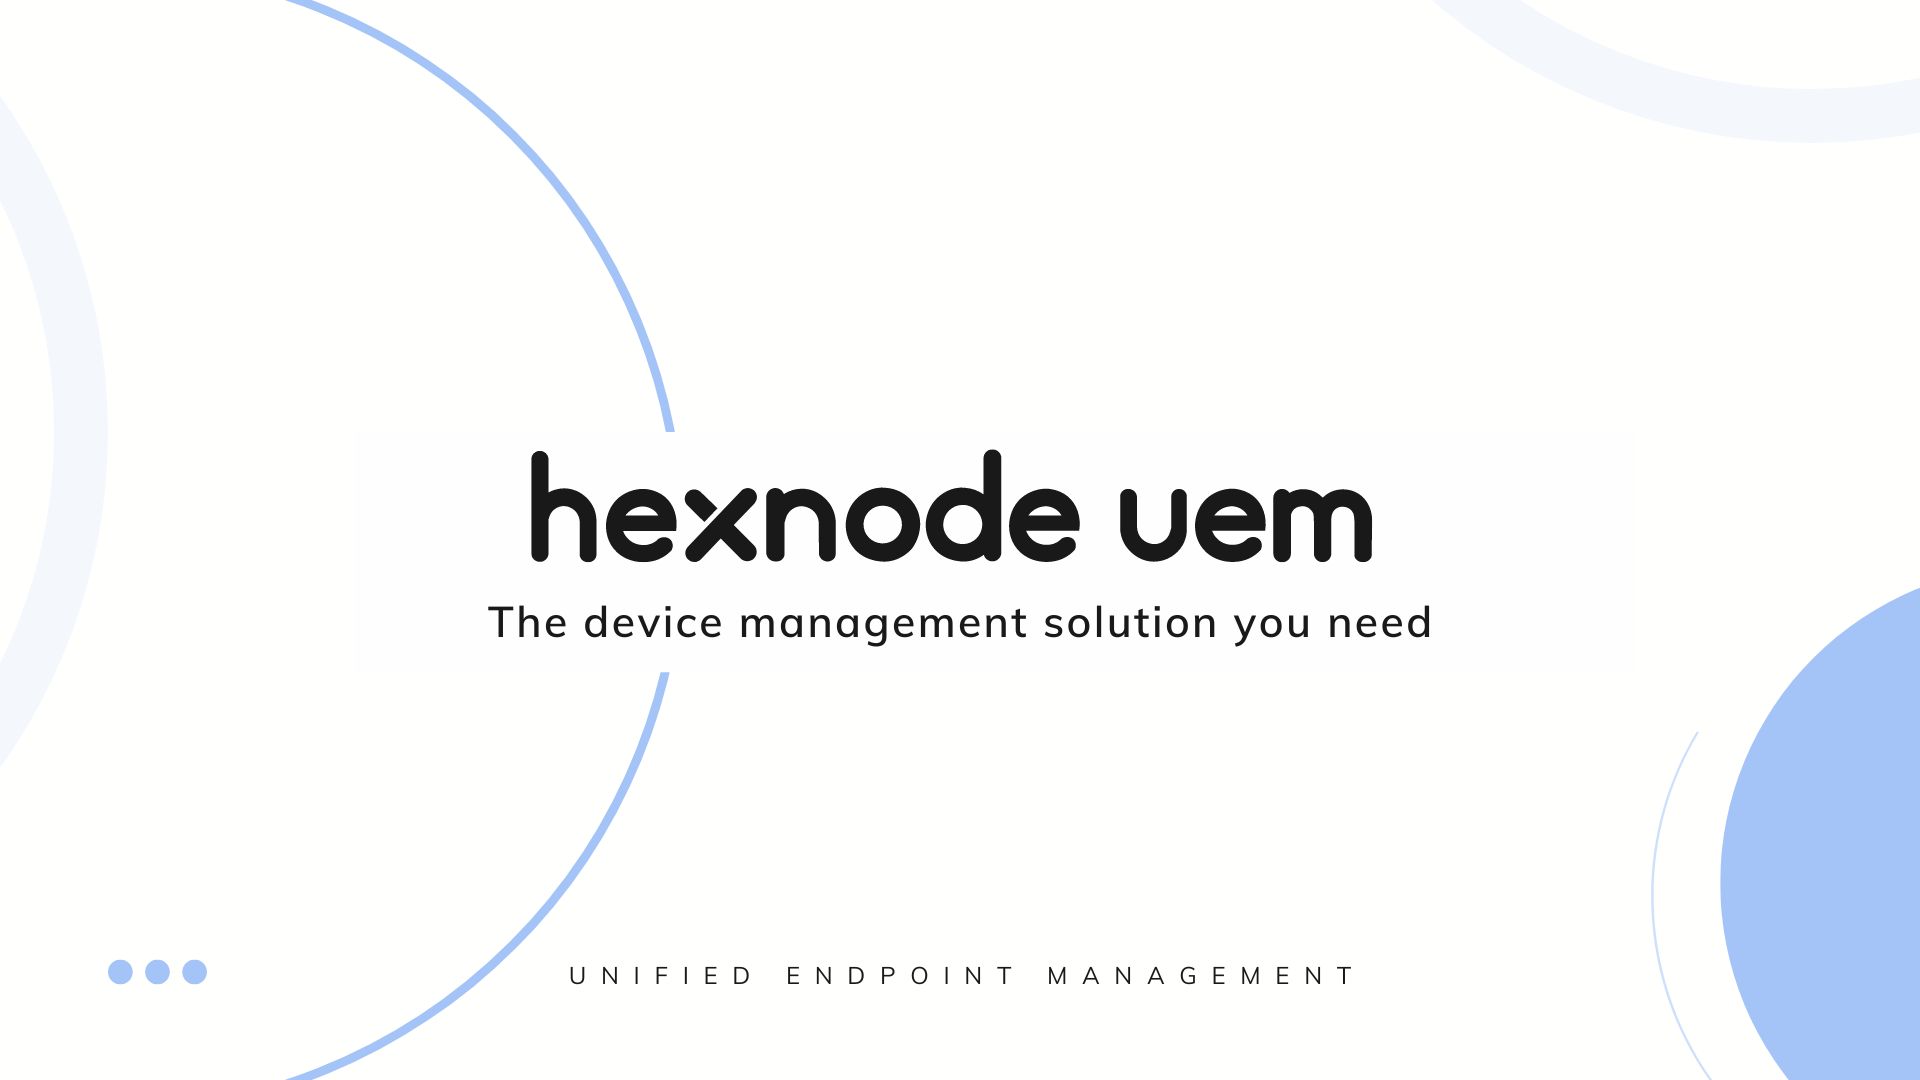 introduction to hexnode uem